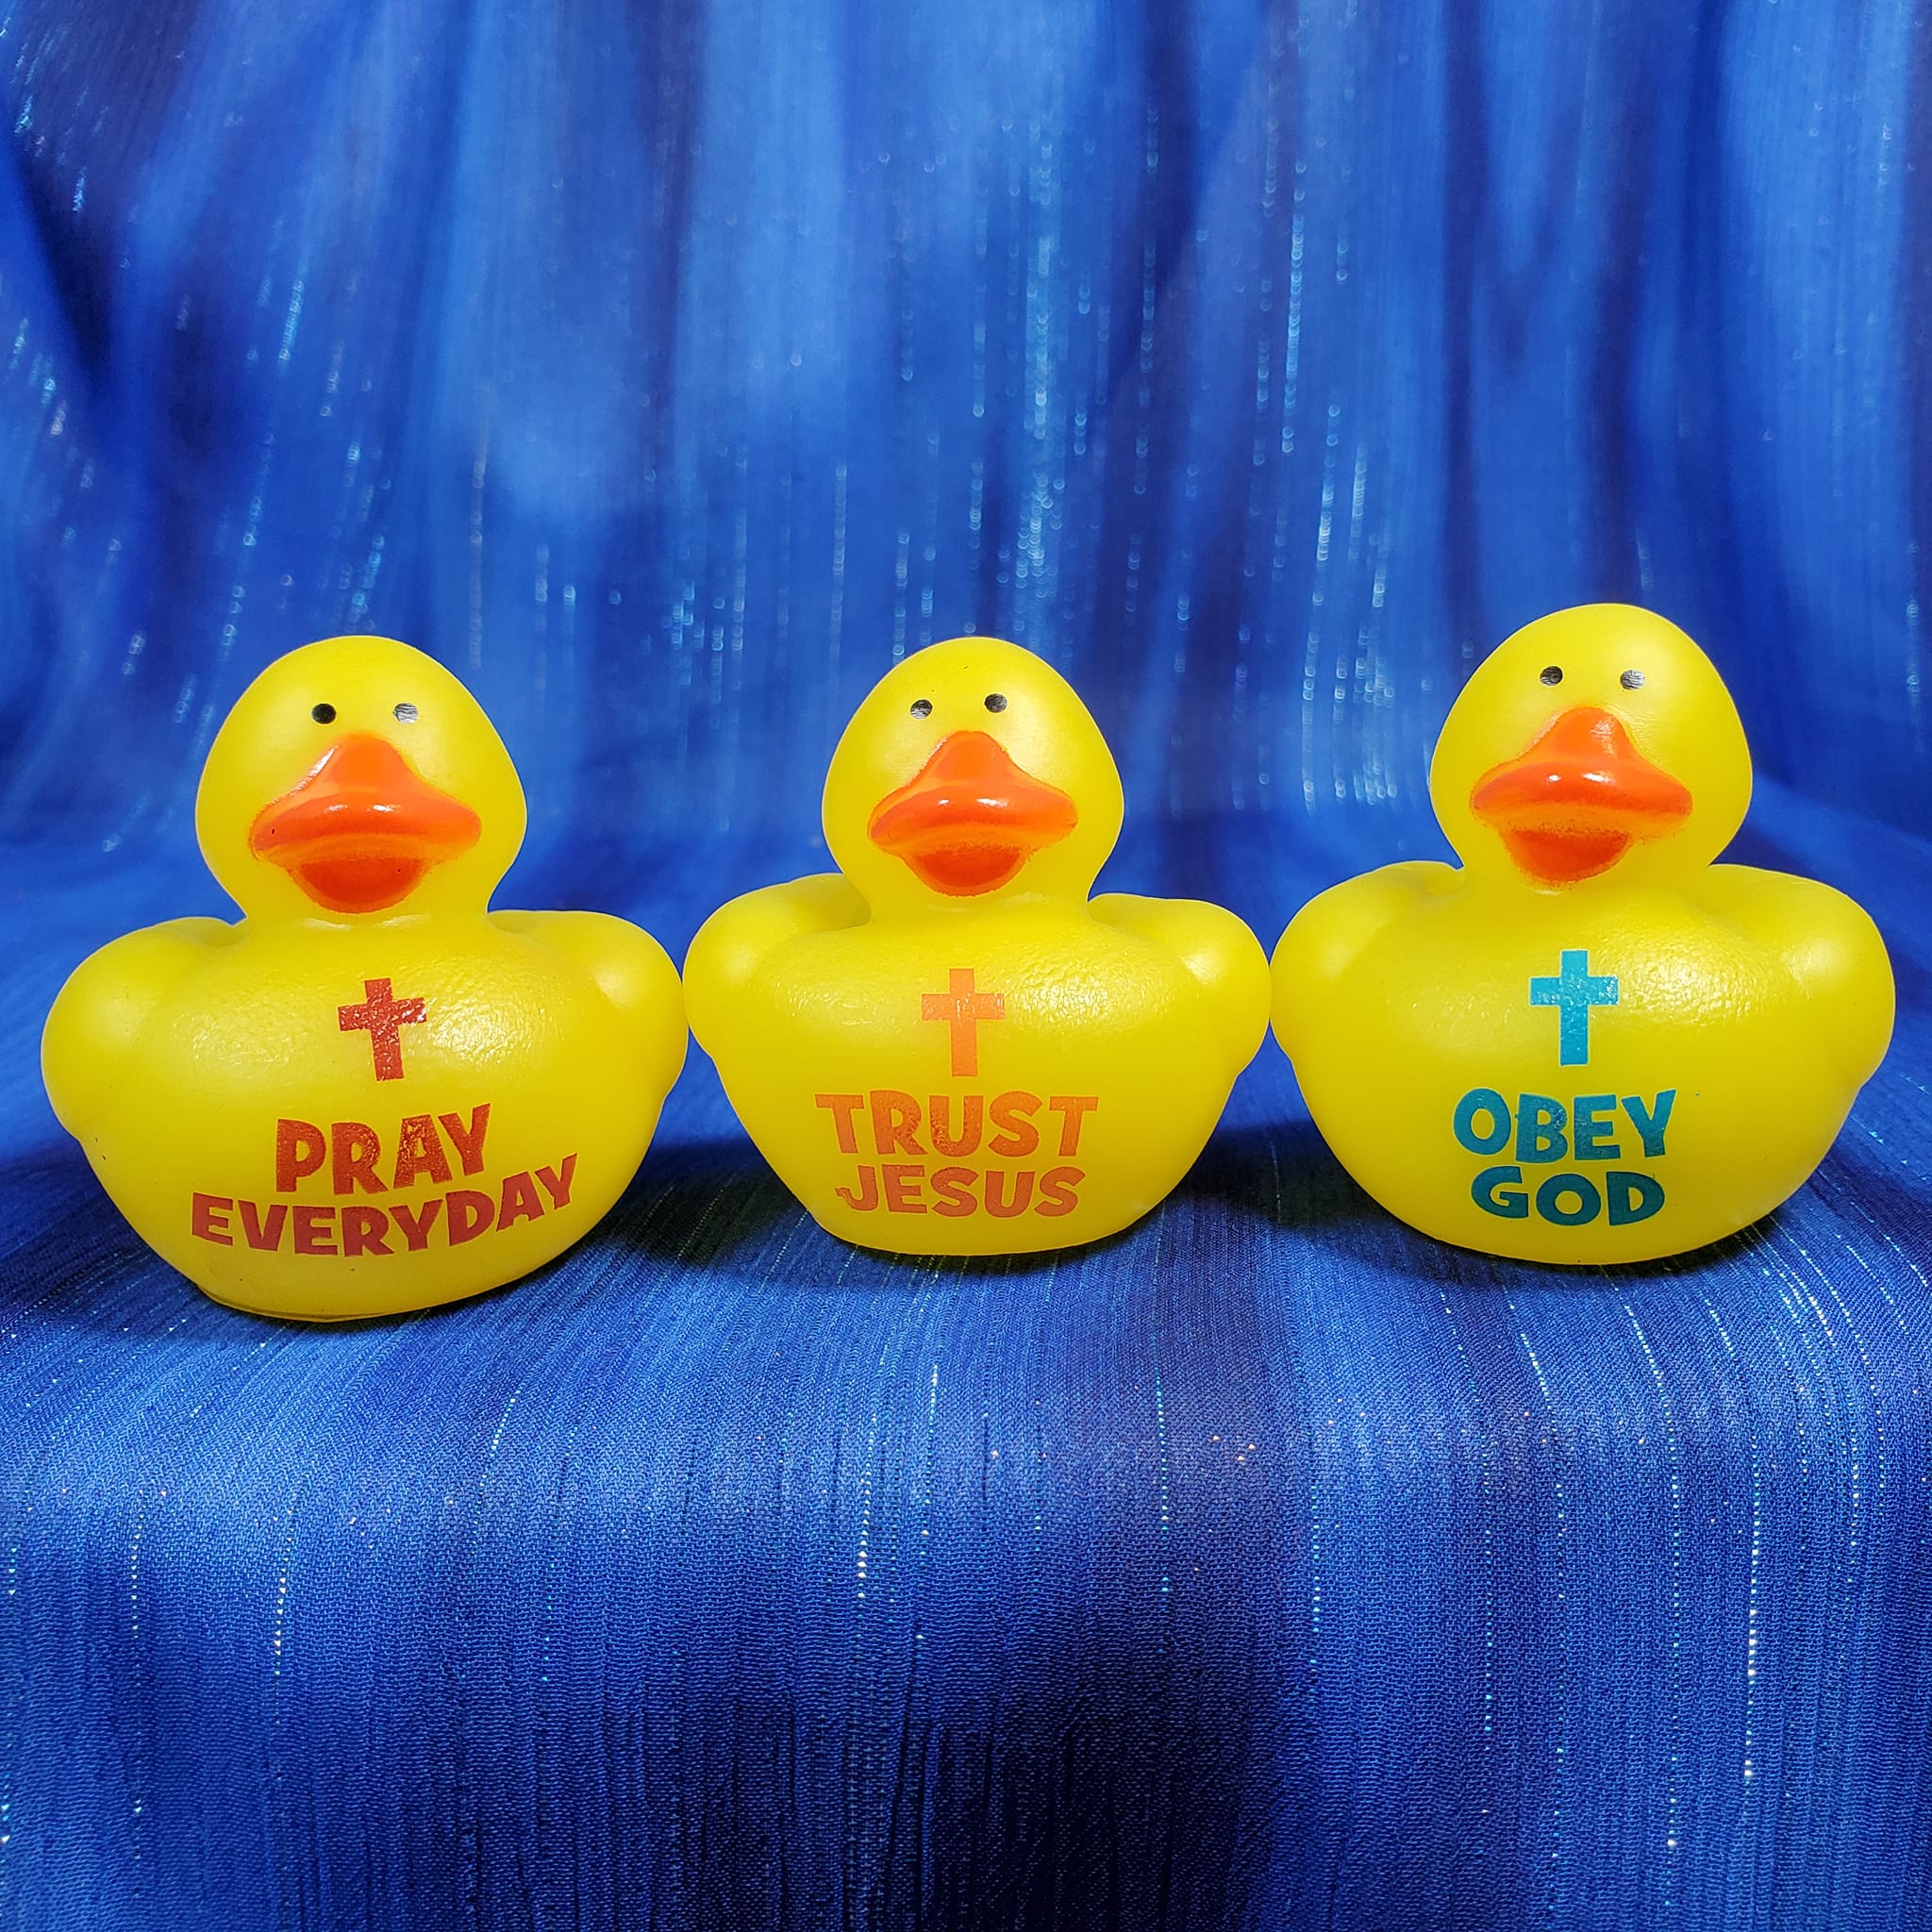 Trust Jesus, Obey God, Pray Everyday Rubber Duck Trio - Click Image to Close